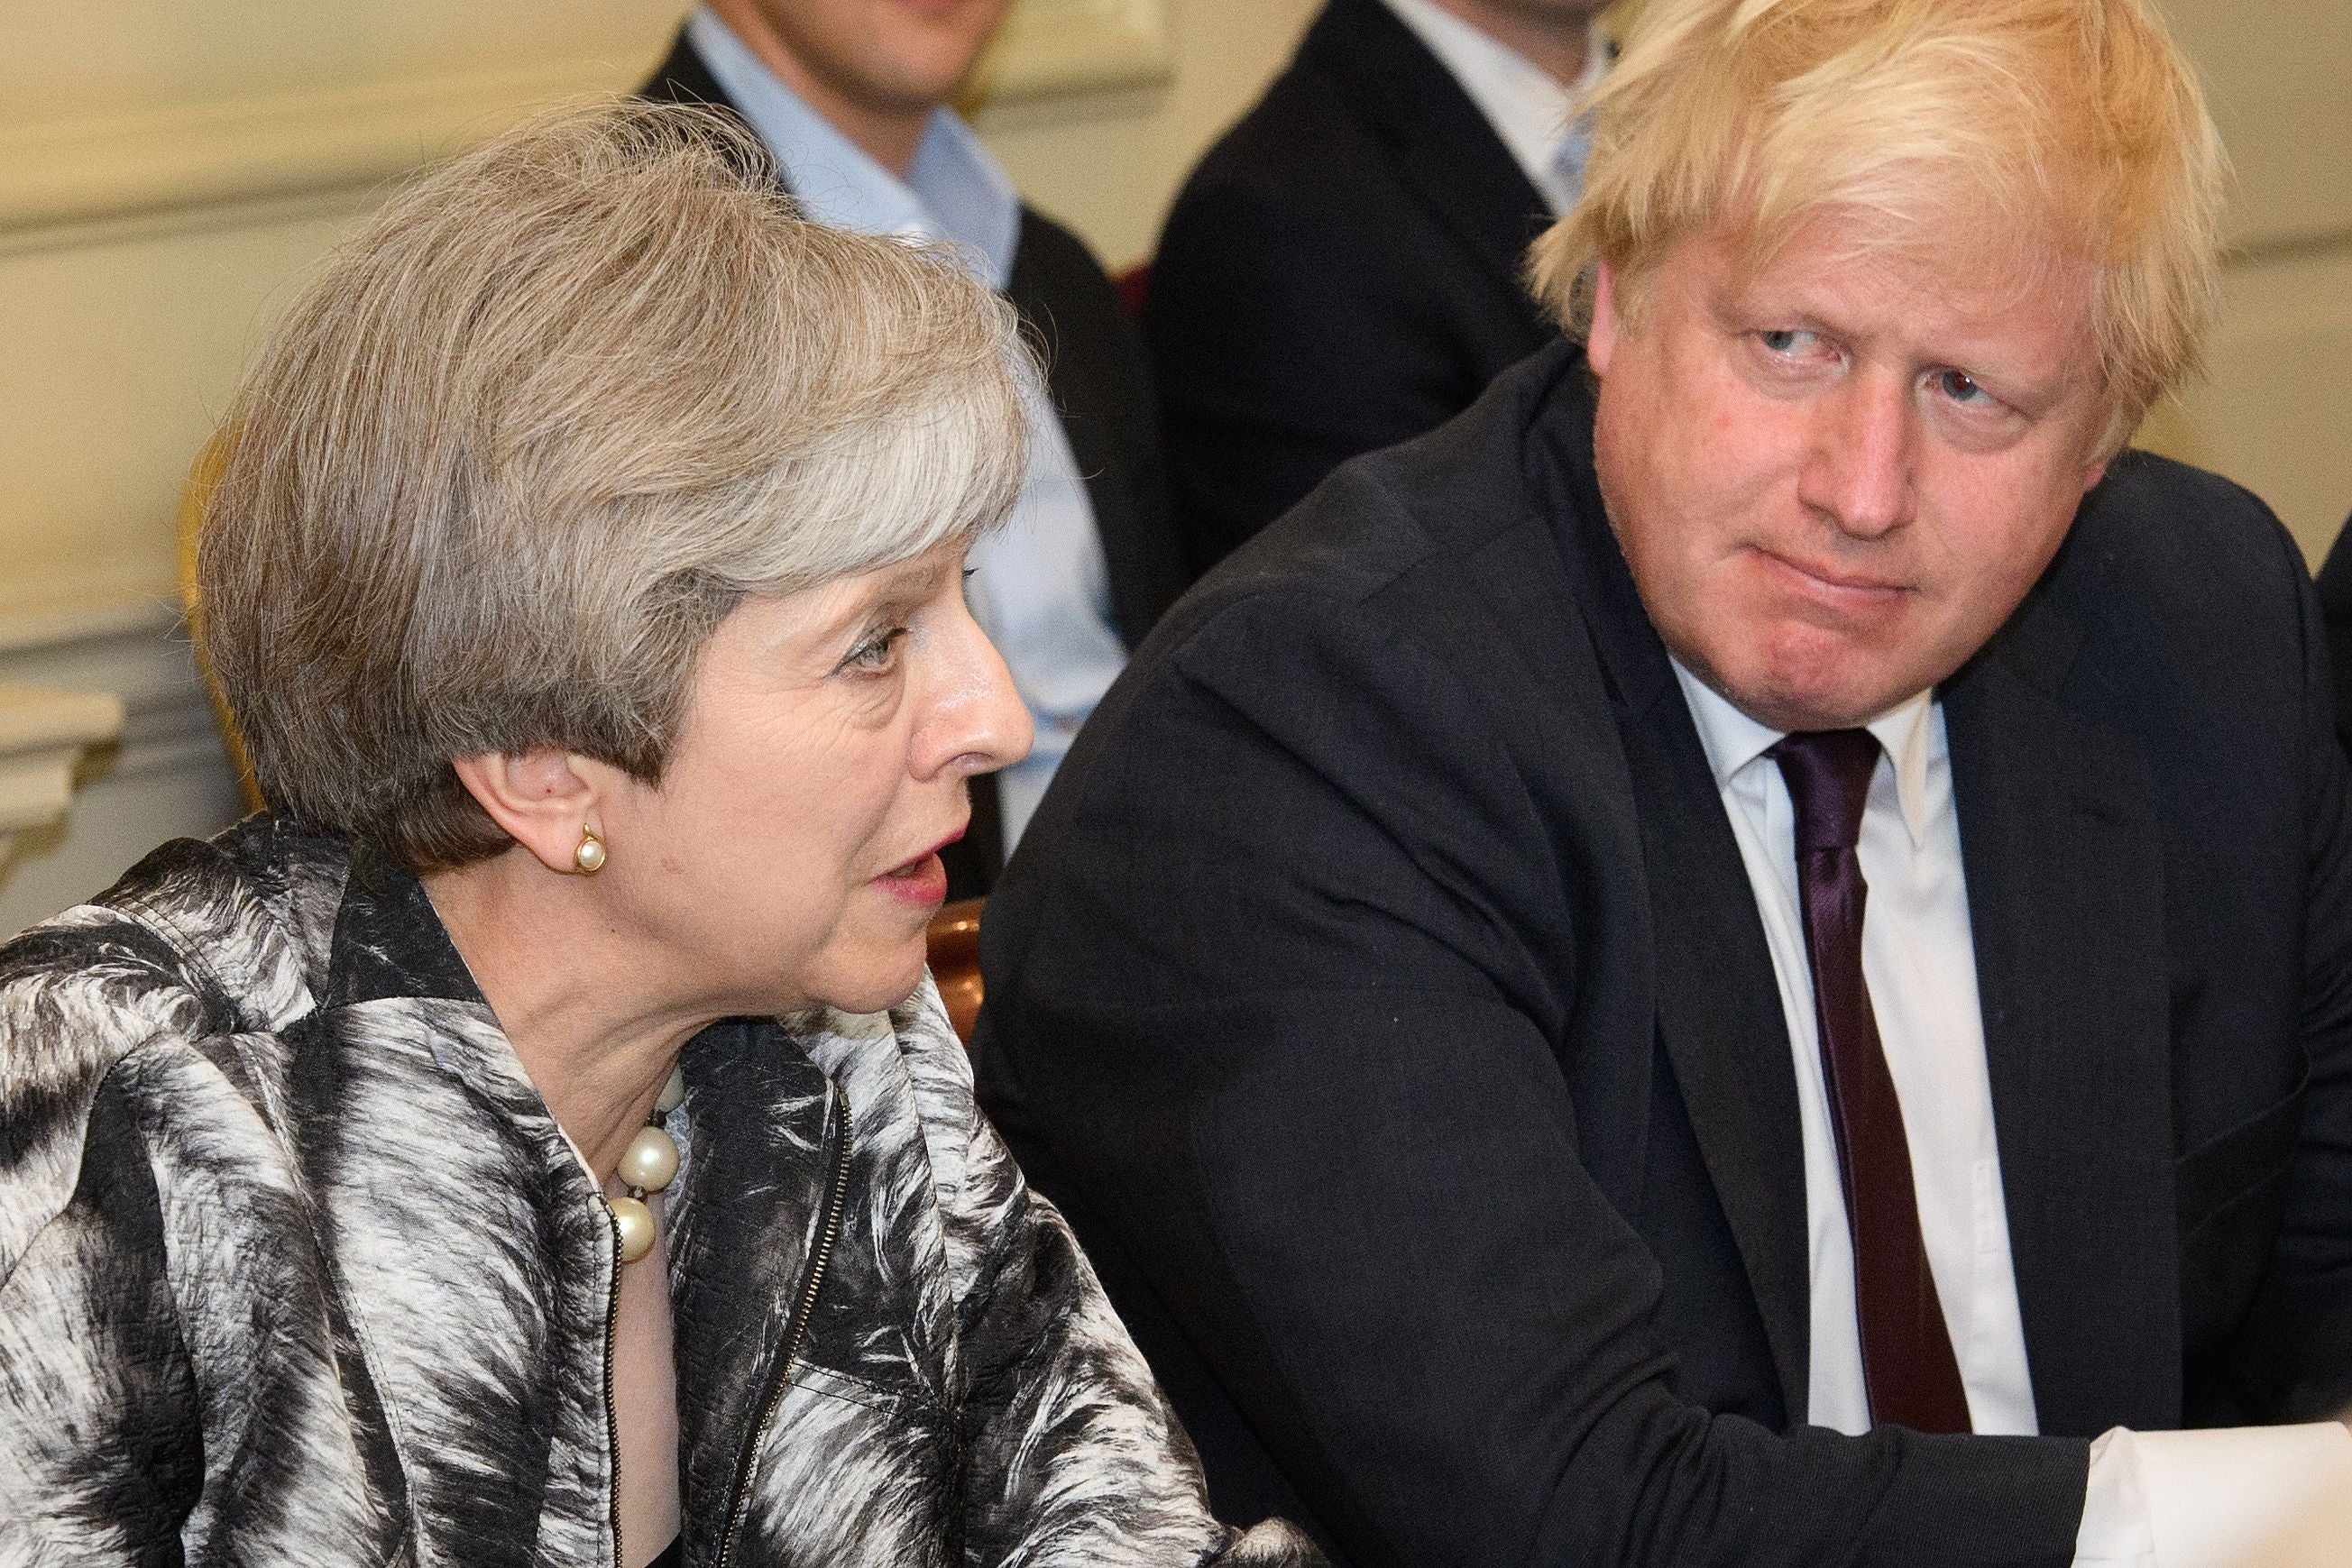 Boris Johnson with former PM Theresa May at the cabinet table in June 2017